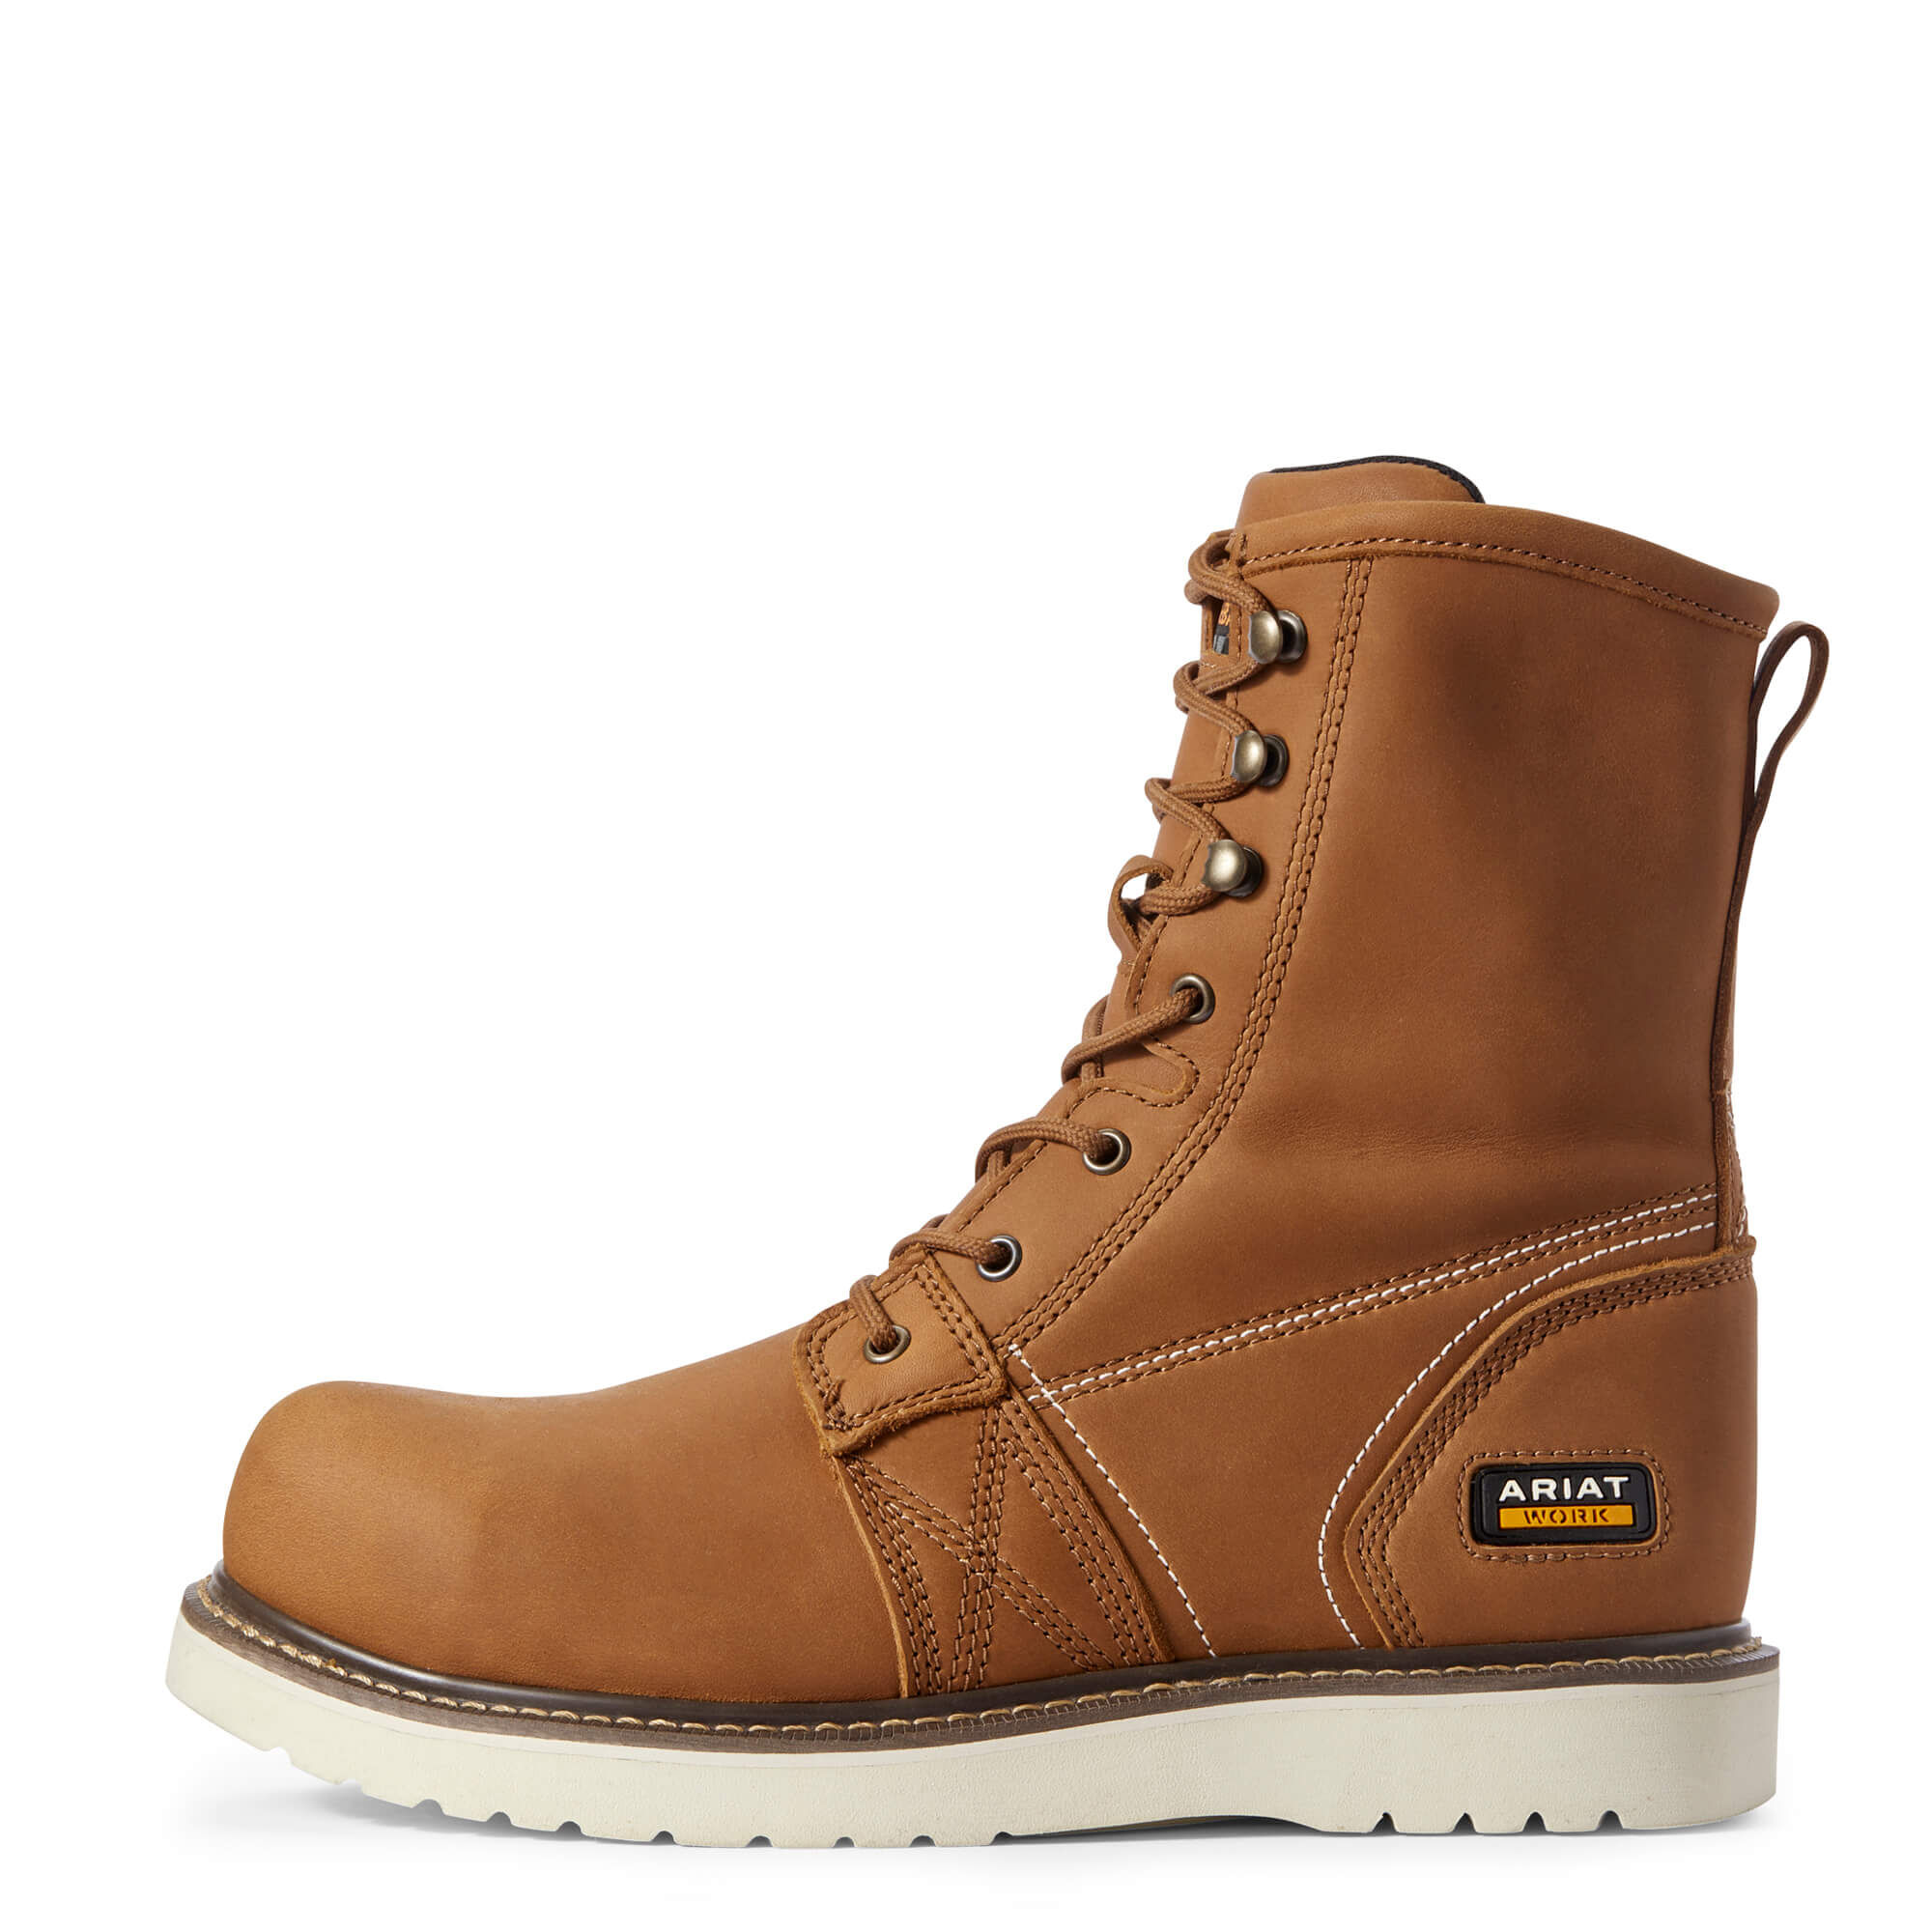 wedge sole composite toe work boots